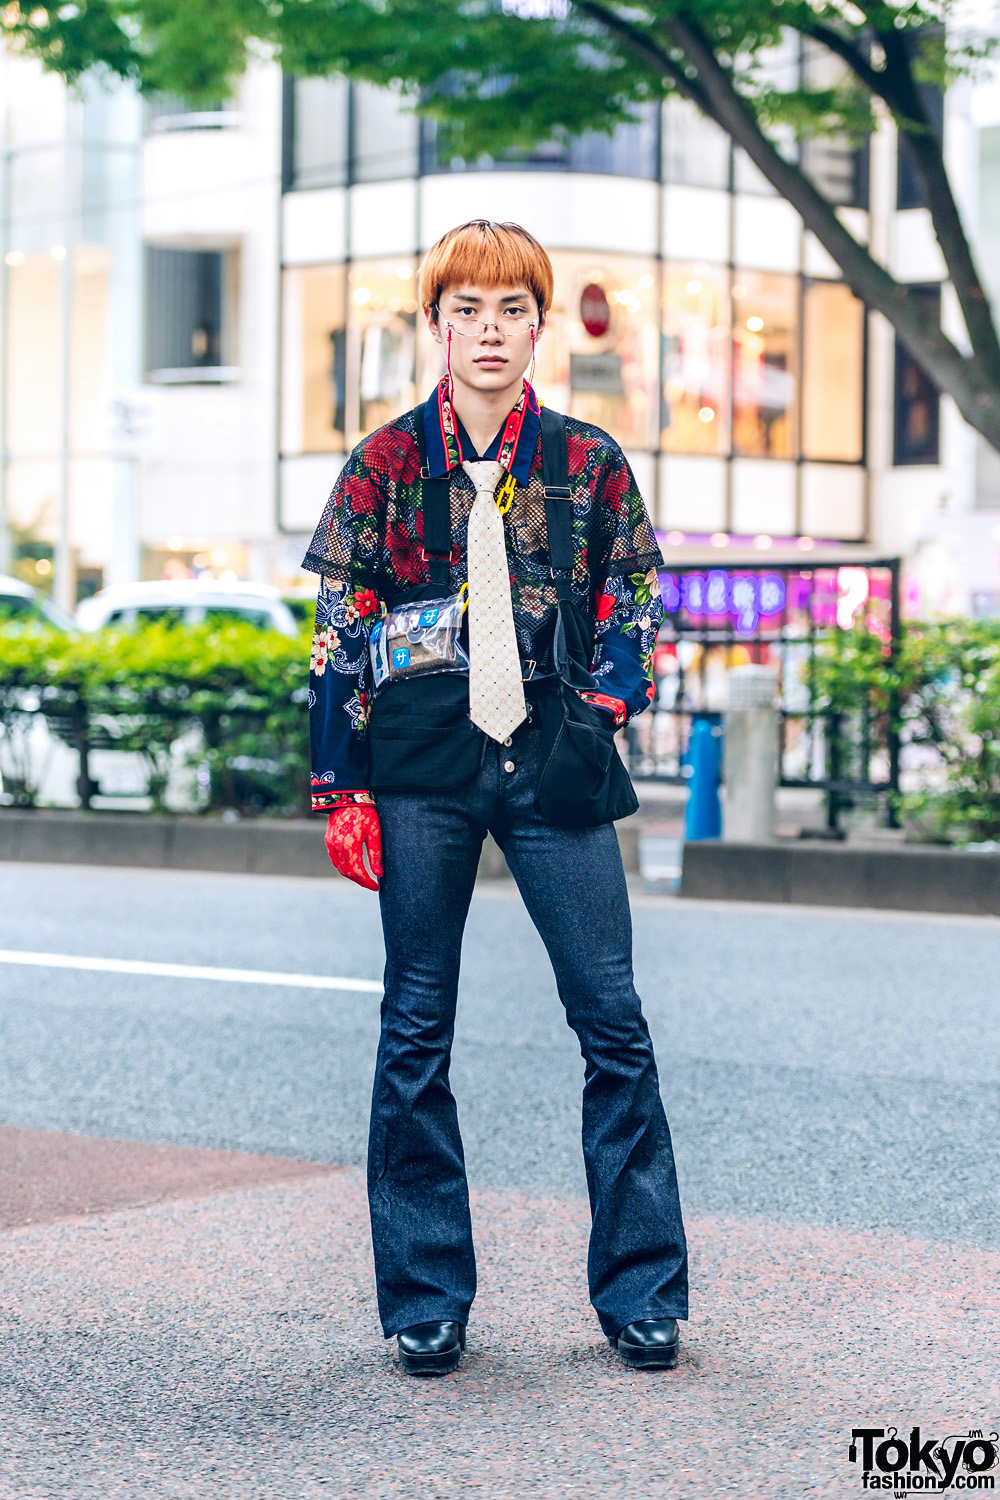 Harajuku Guy w/ Floral Print Top, Printed Necktie, Flared Jeans, Black Boots & Red Floral Lace Gloves